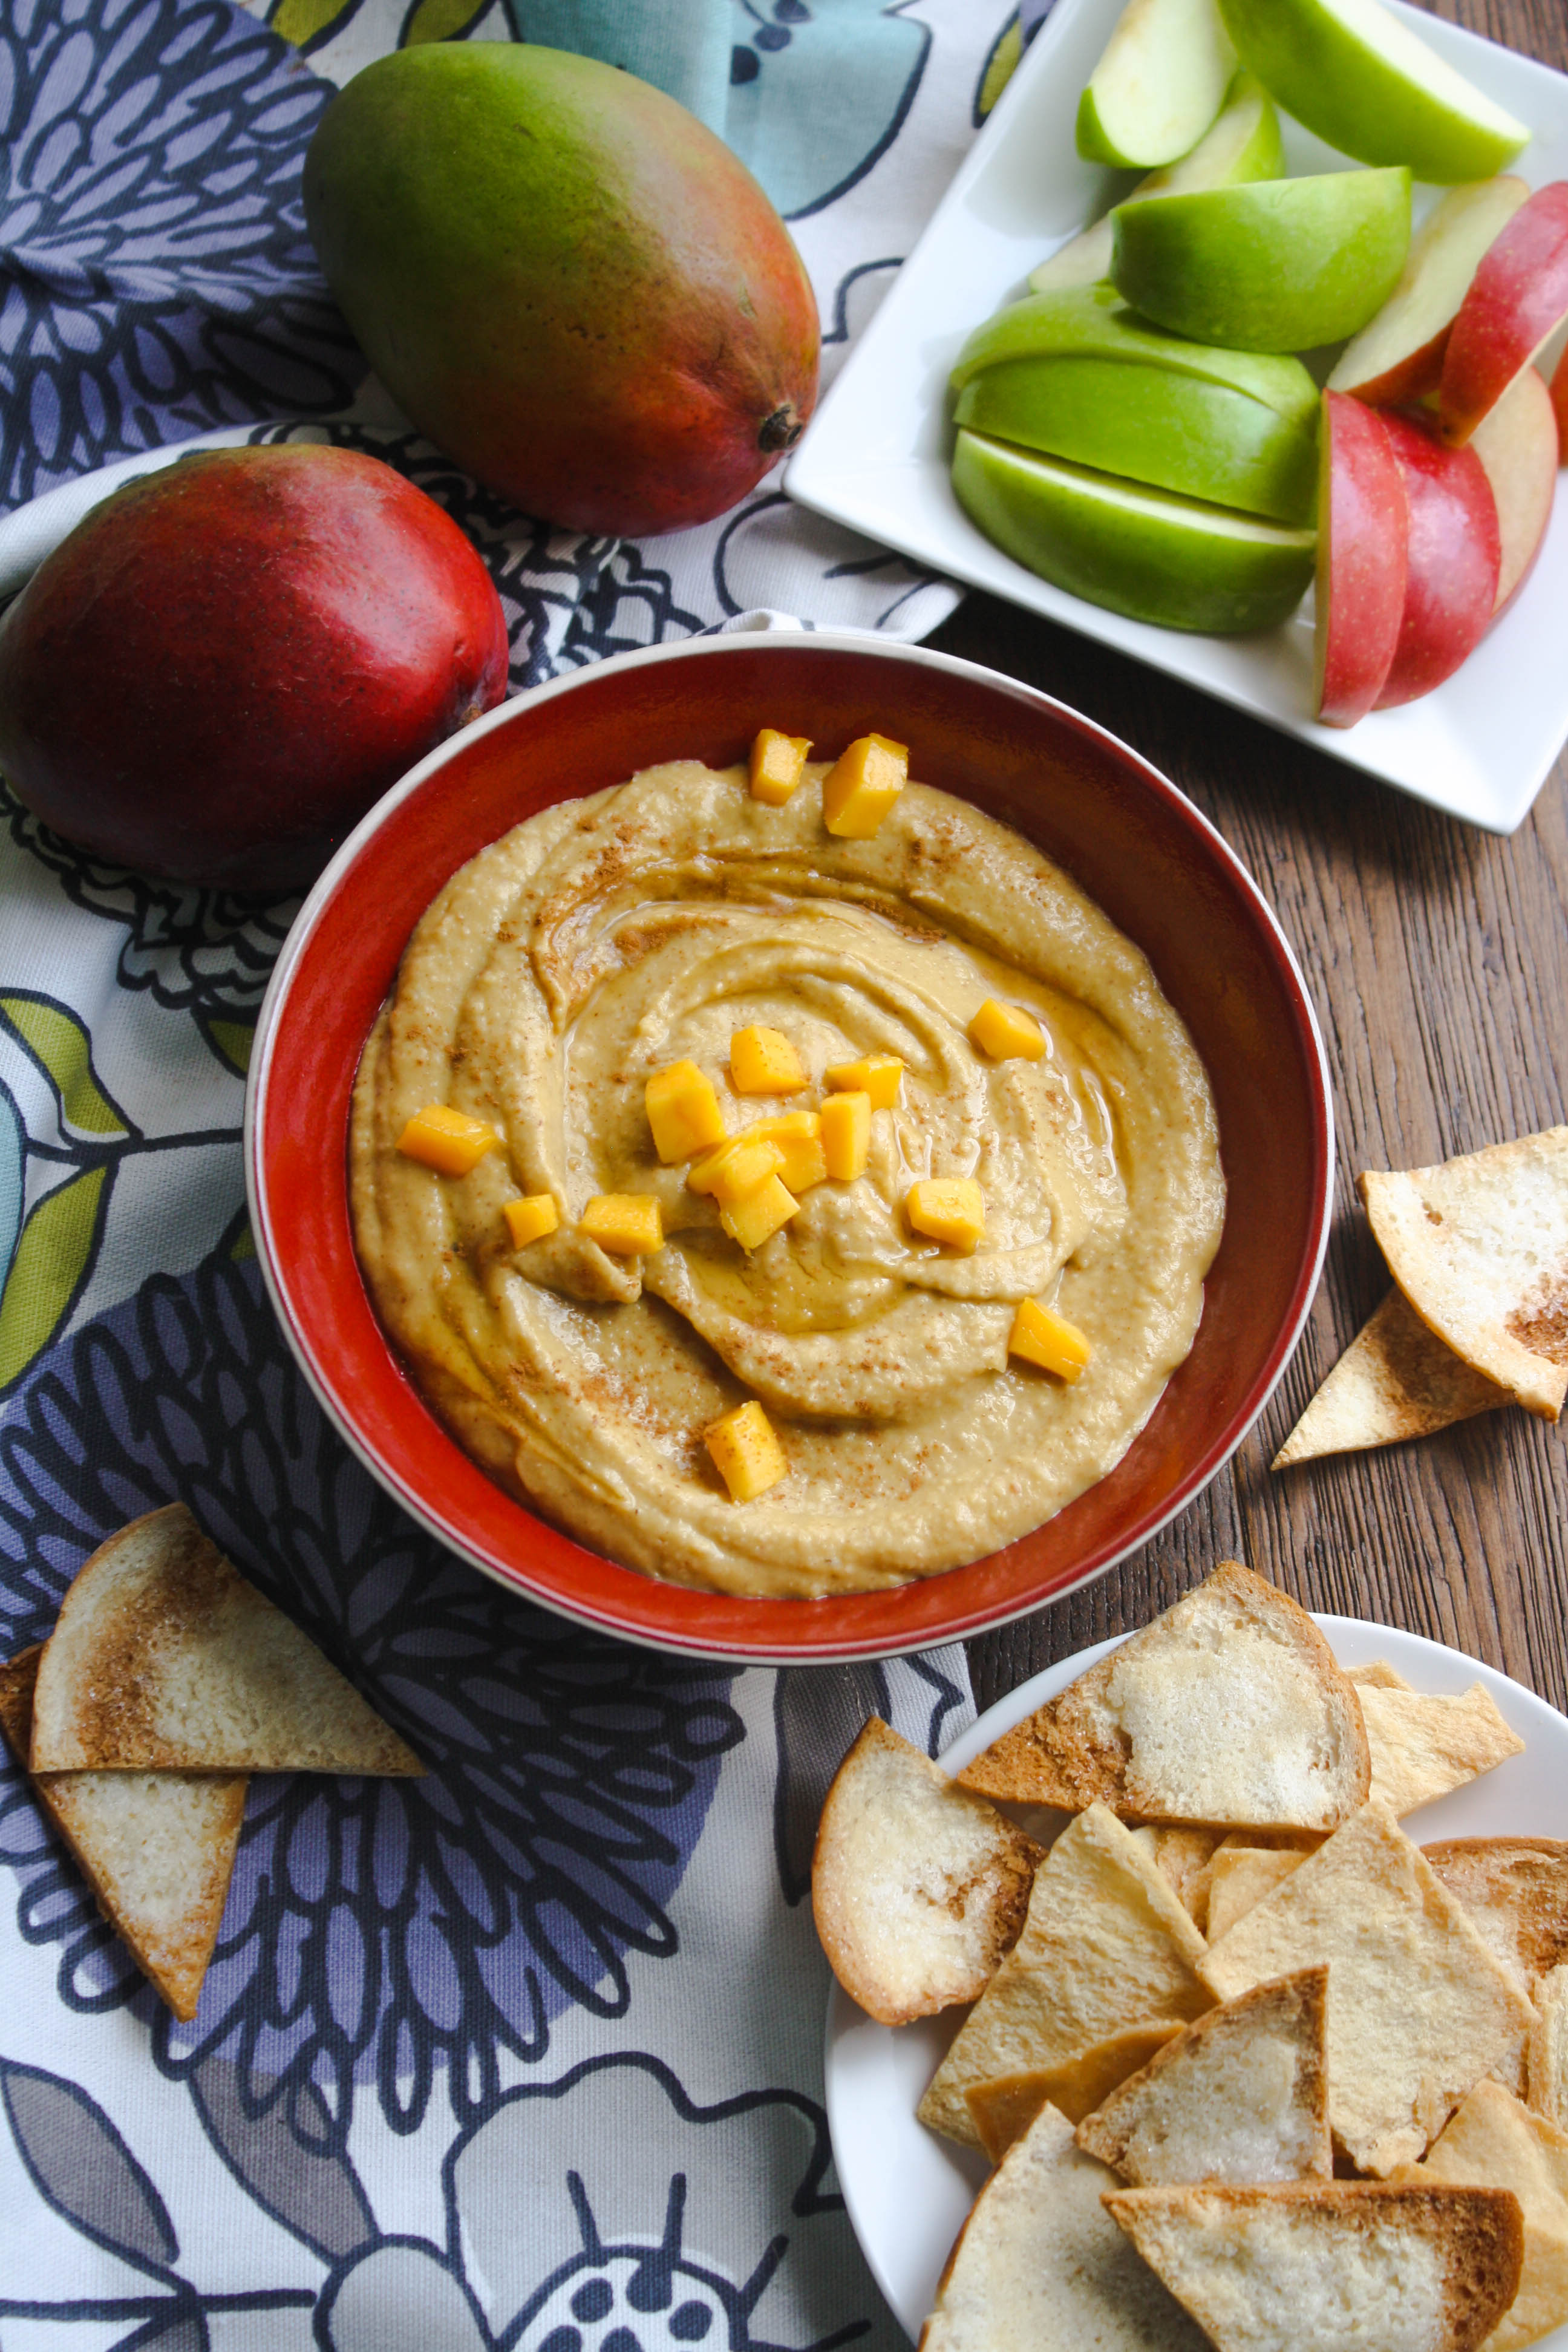 Honey-Mango Dessert Hummus is a fantastic treat! It makes a healthy snack, or good-for-you dessert, too!